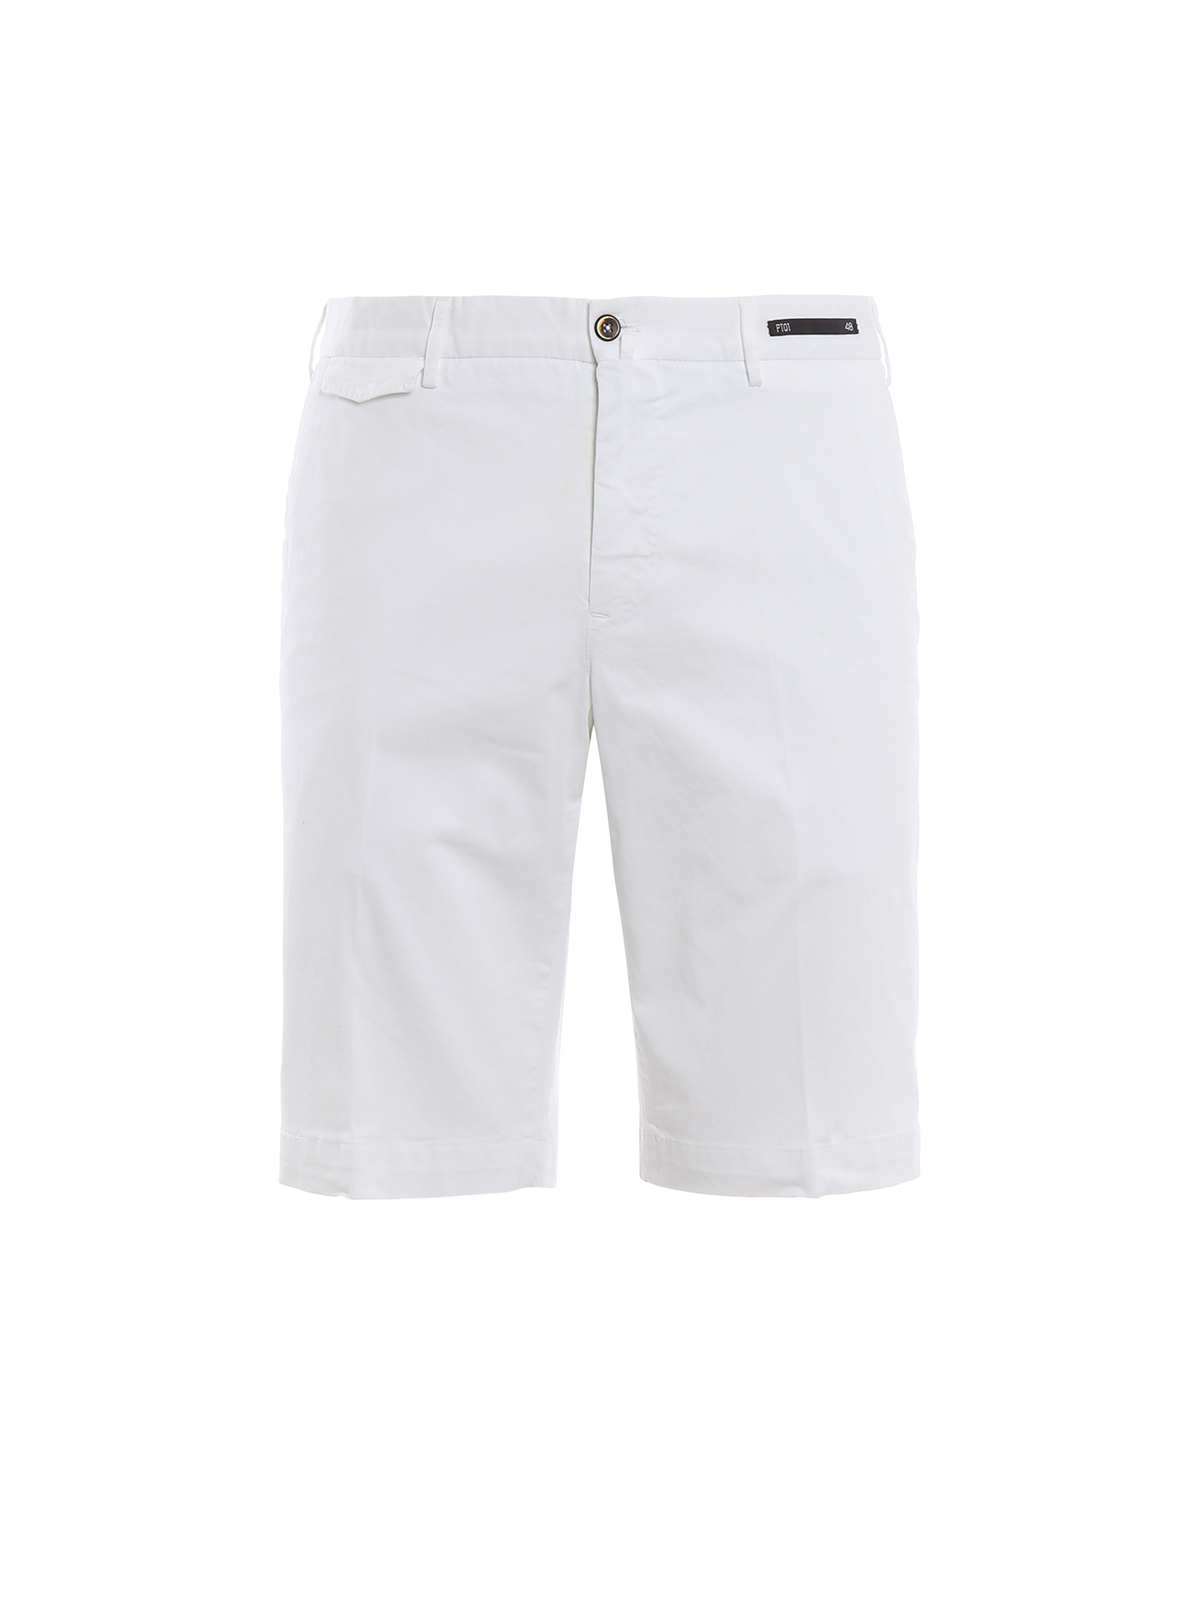 Men's Gym Short shorts - In a Small - White | Clothes design, Gym shorts  womens, Outfit inspo